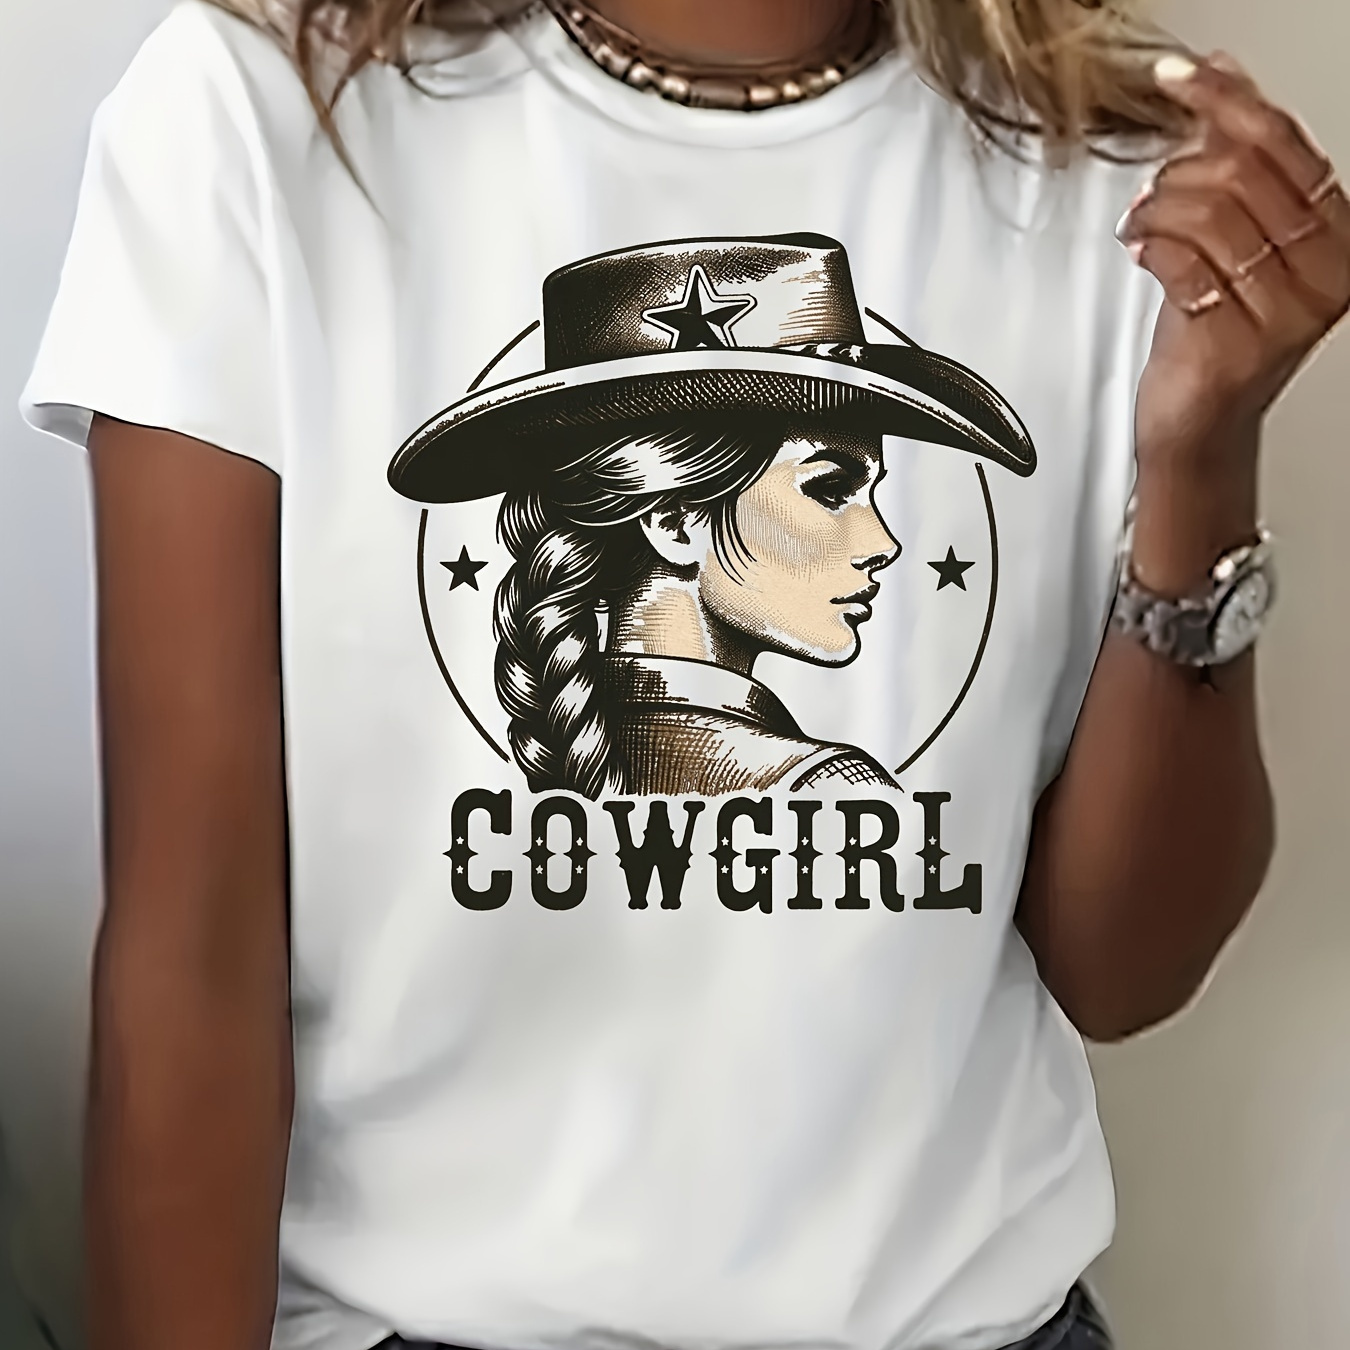 

Cowgirl Print Crew Neck T-shirt, Casual Short Sleeve Top For Spring & Summer, Women's Clothing